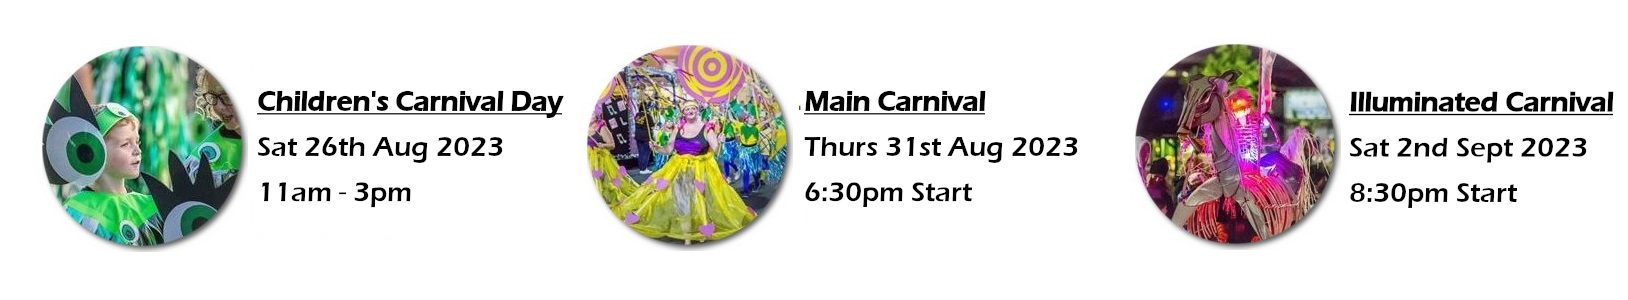 Ryde Carnival Dates